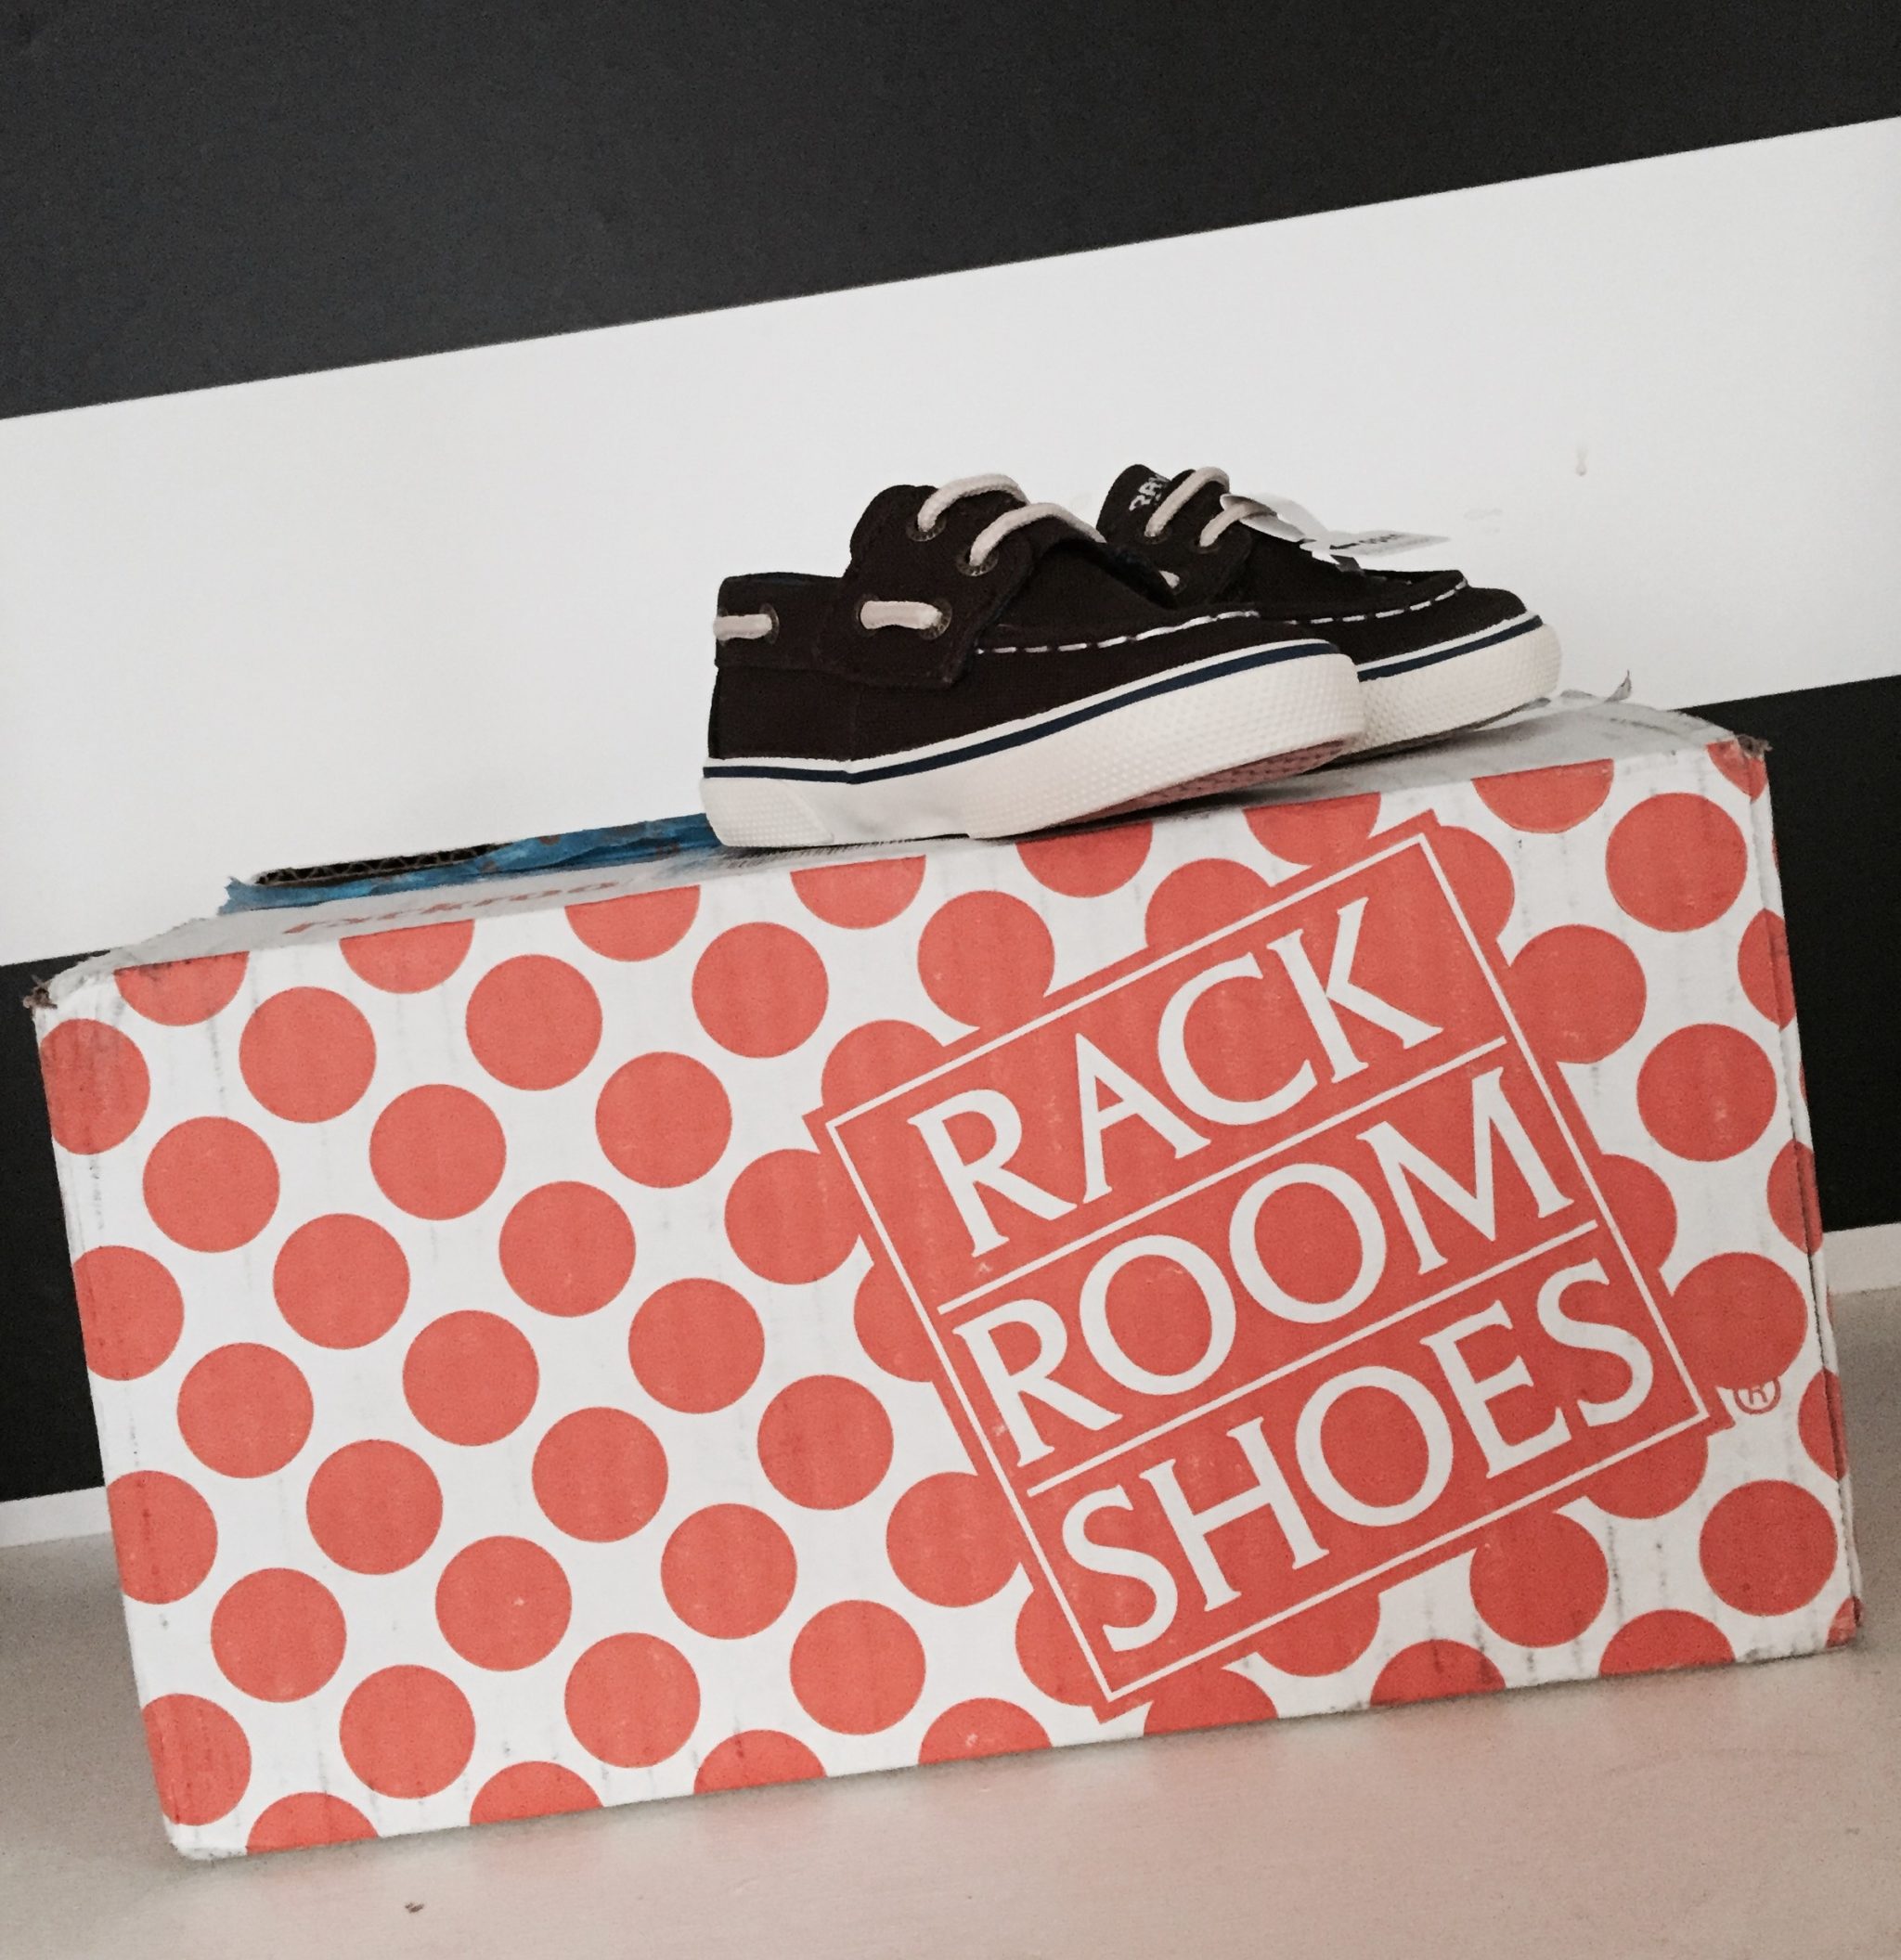 rack room shoes buy one get one free